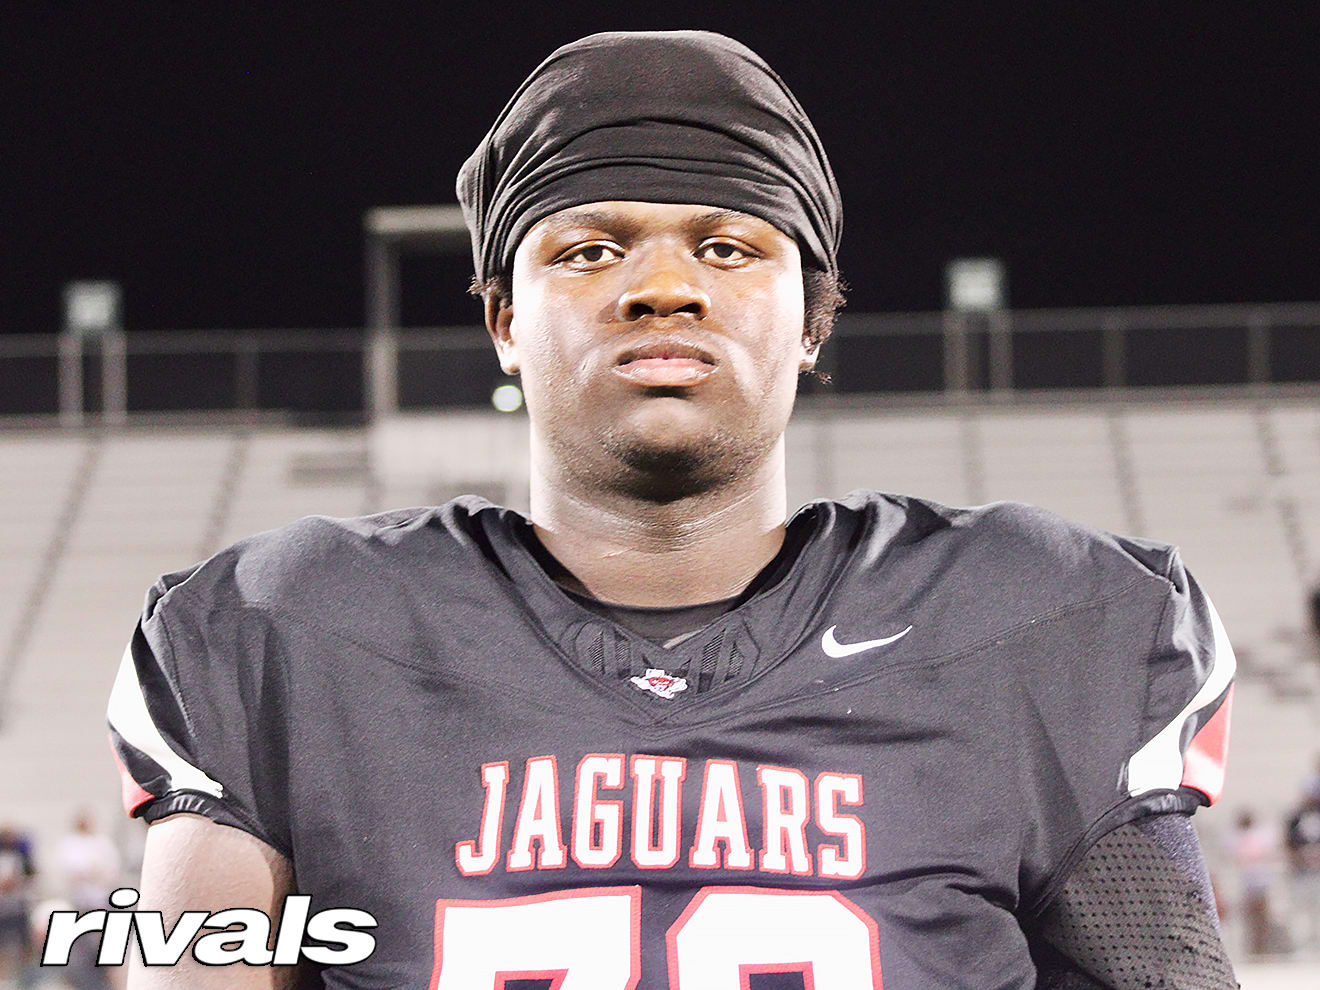 Mesquite Horn OT Lamont Rogers is a Massive Target in 2025